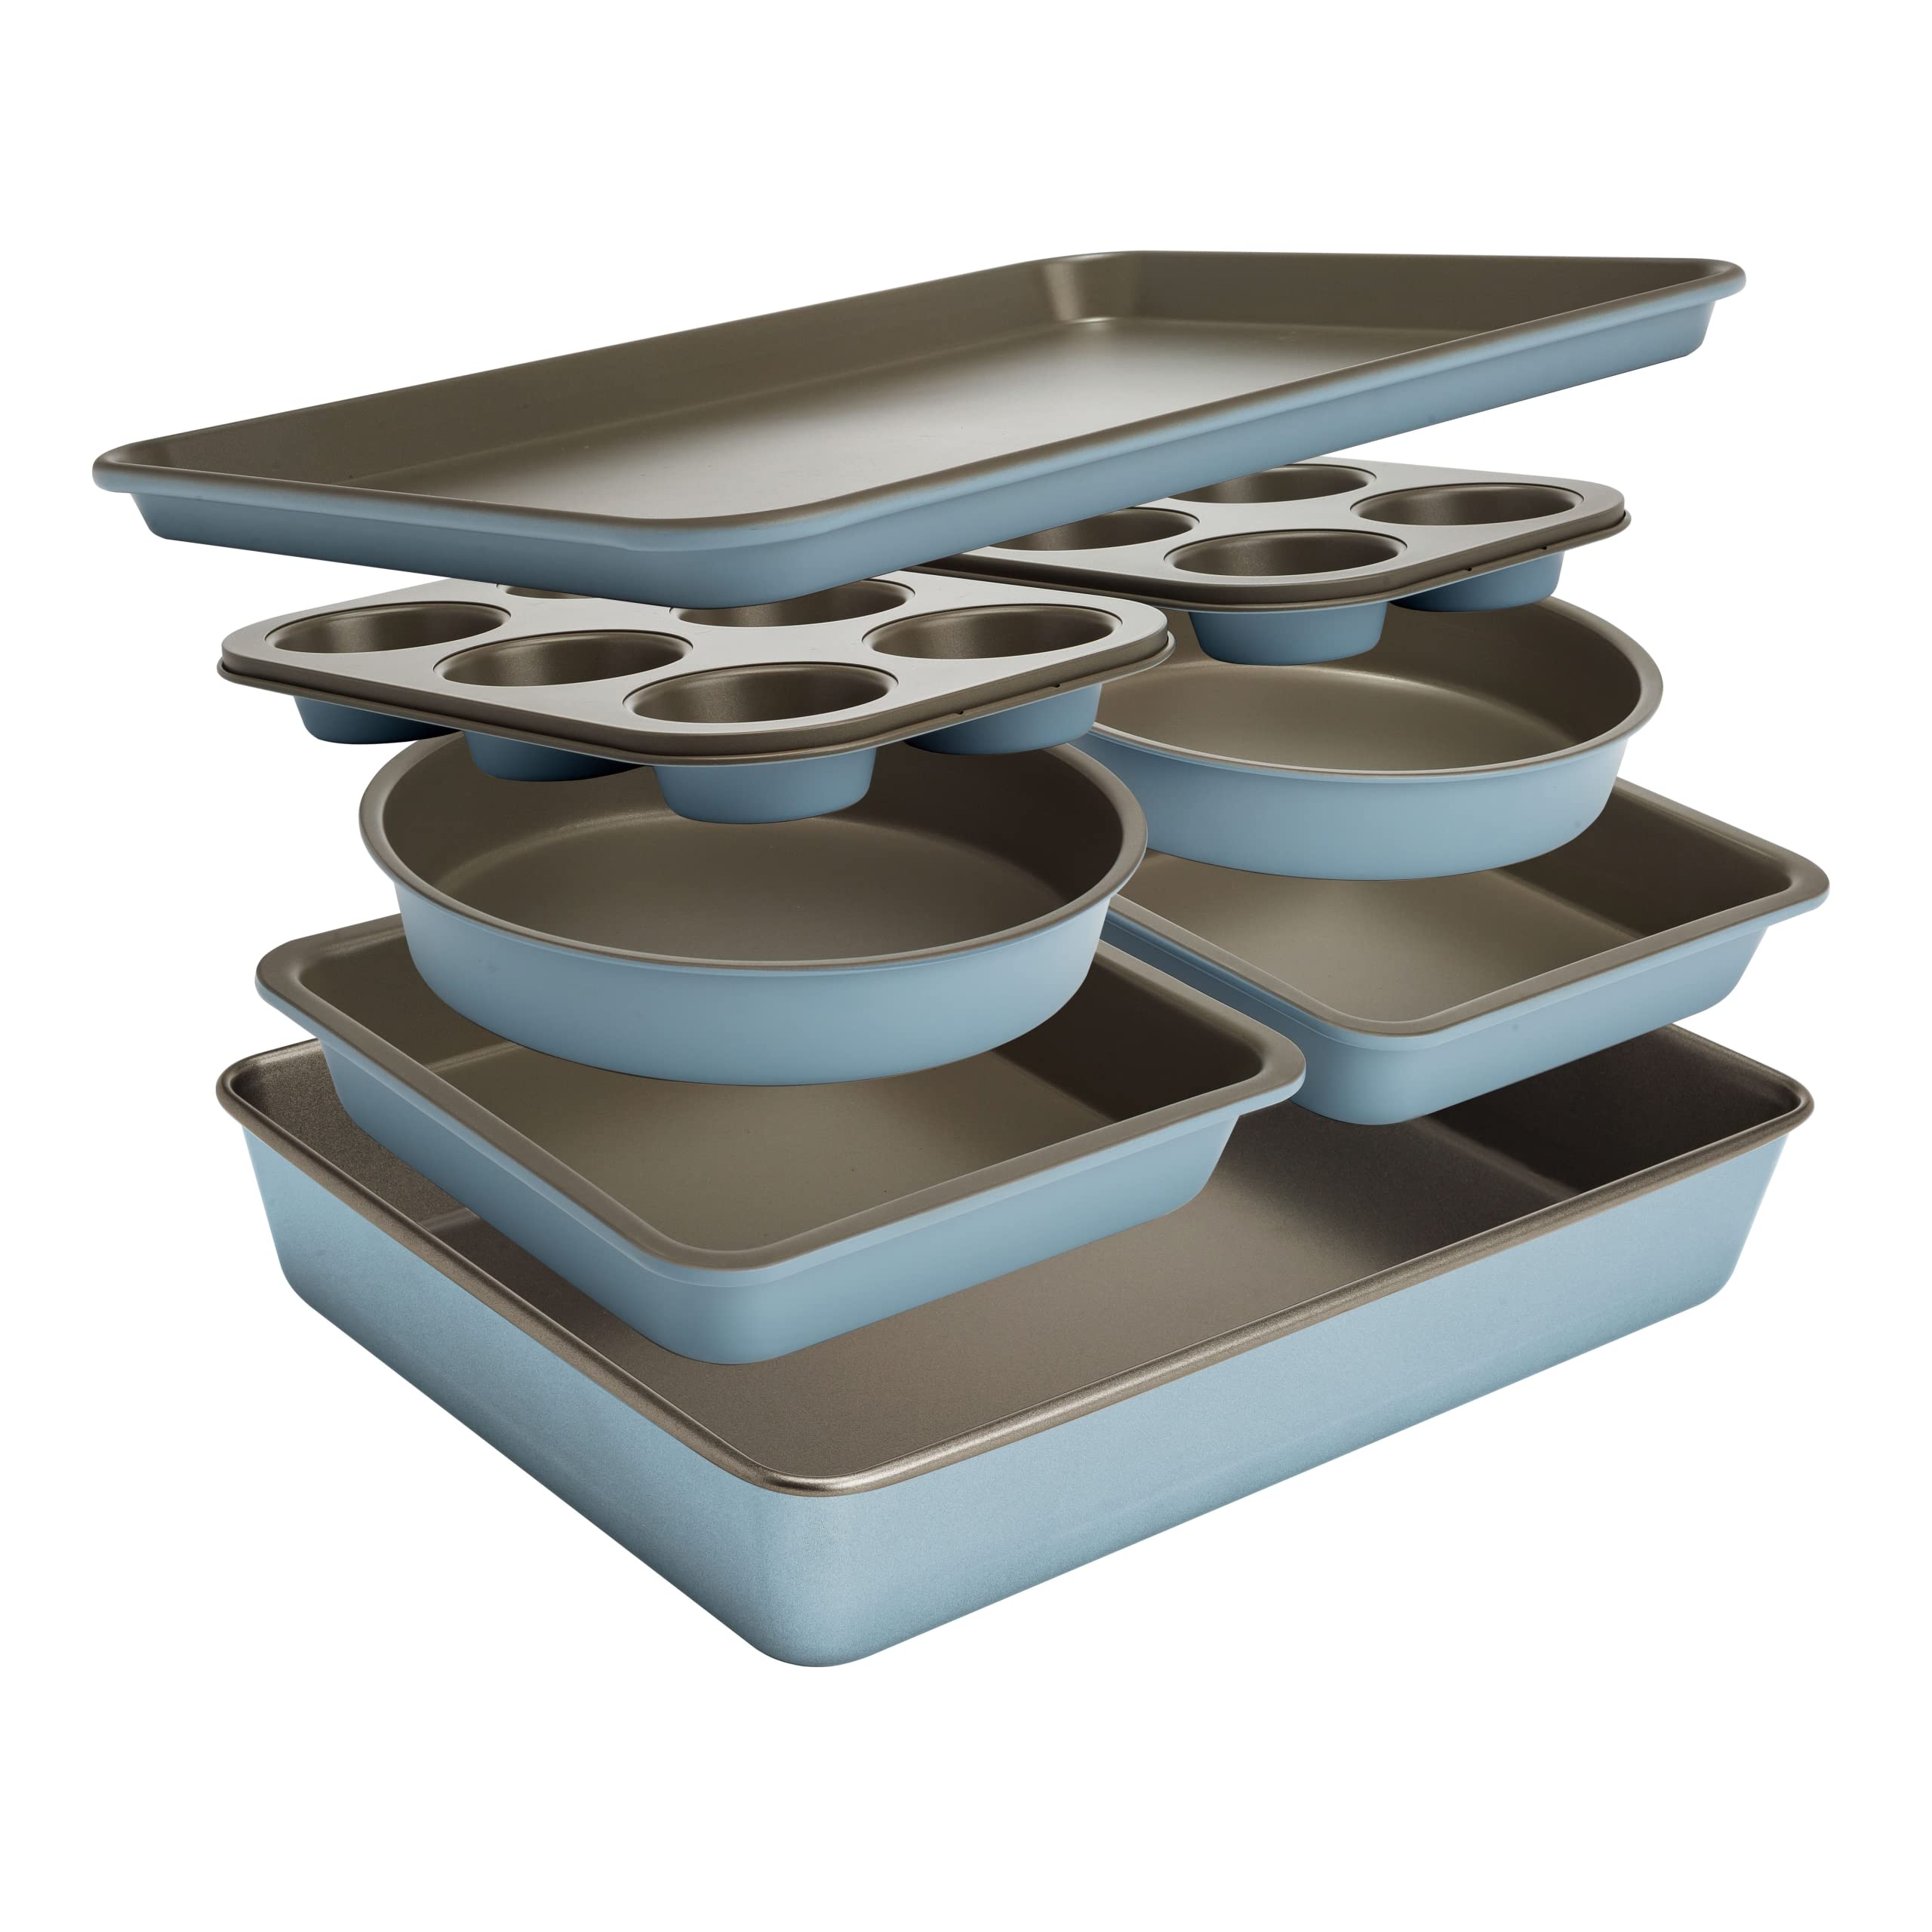 Goodful All-in-One Bakeware Set, Blue